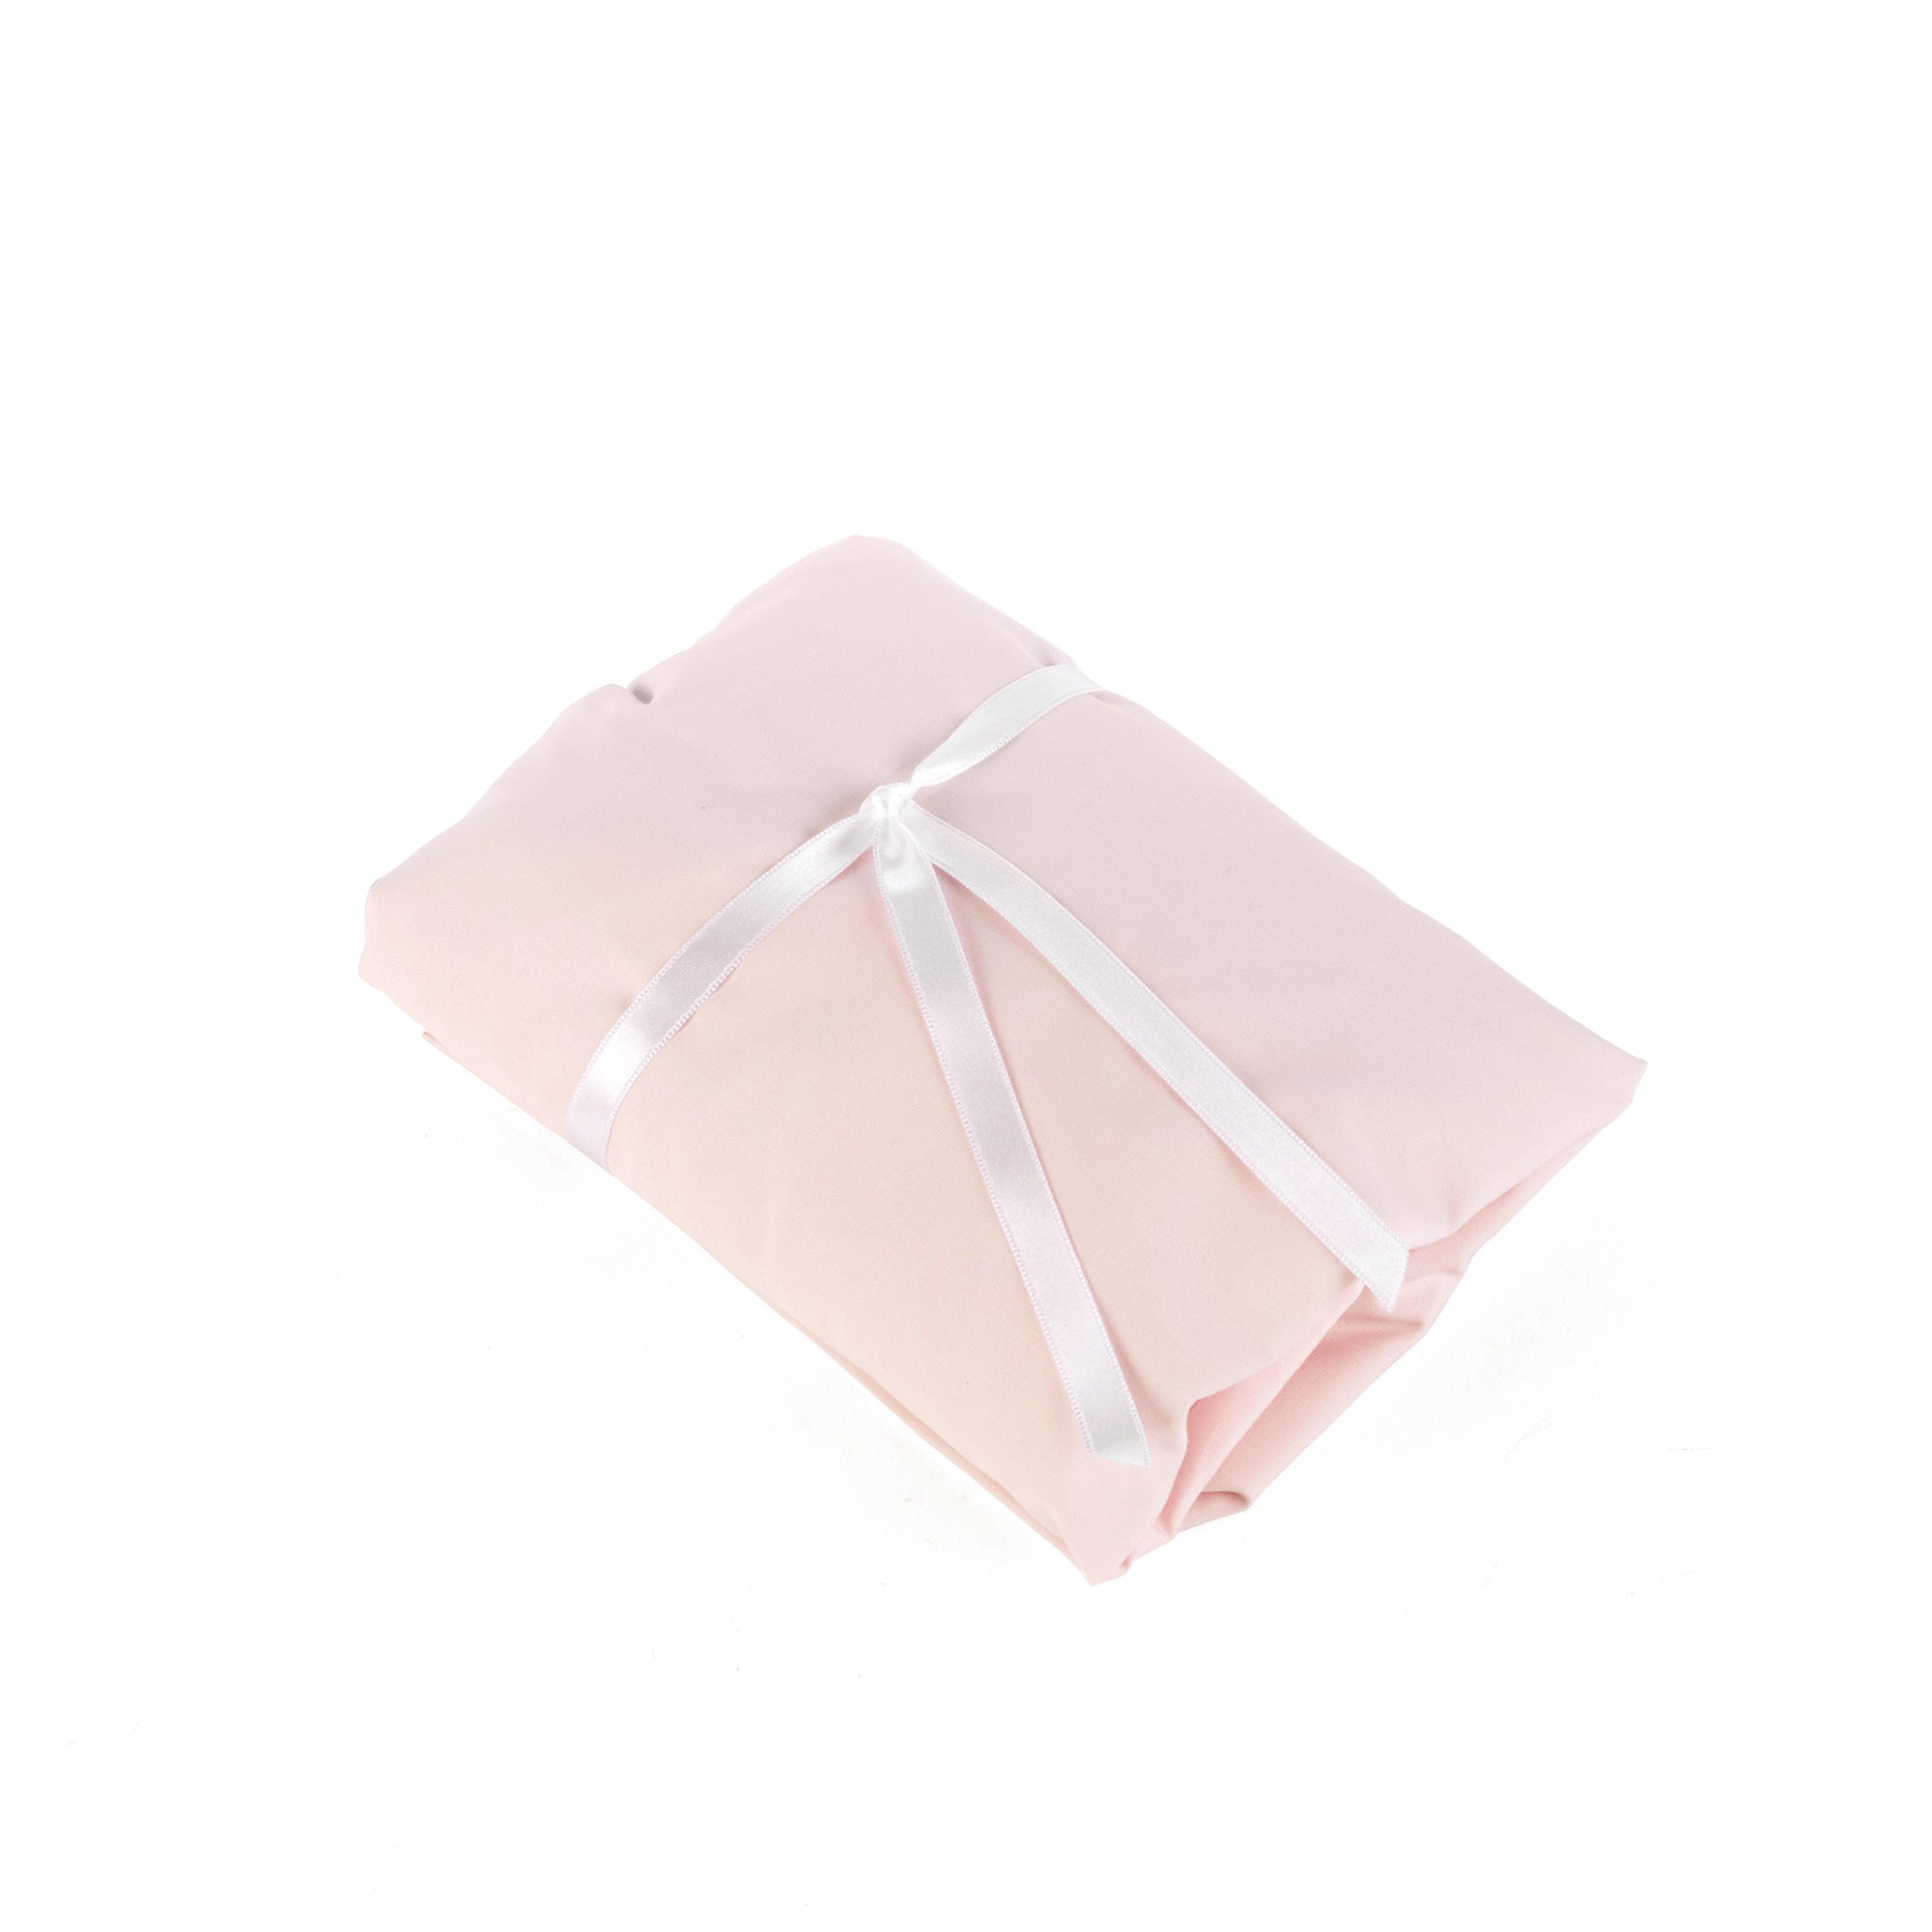 Theophile & Patachou Cot Bed Fitted Sheet 70 x 140 cm - Cotton Pink